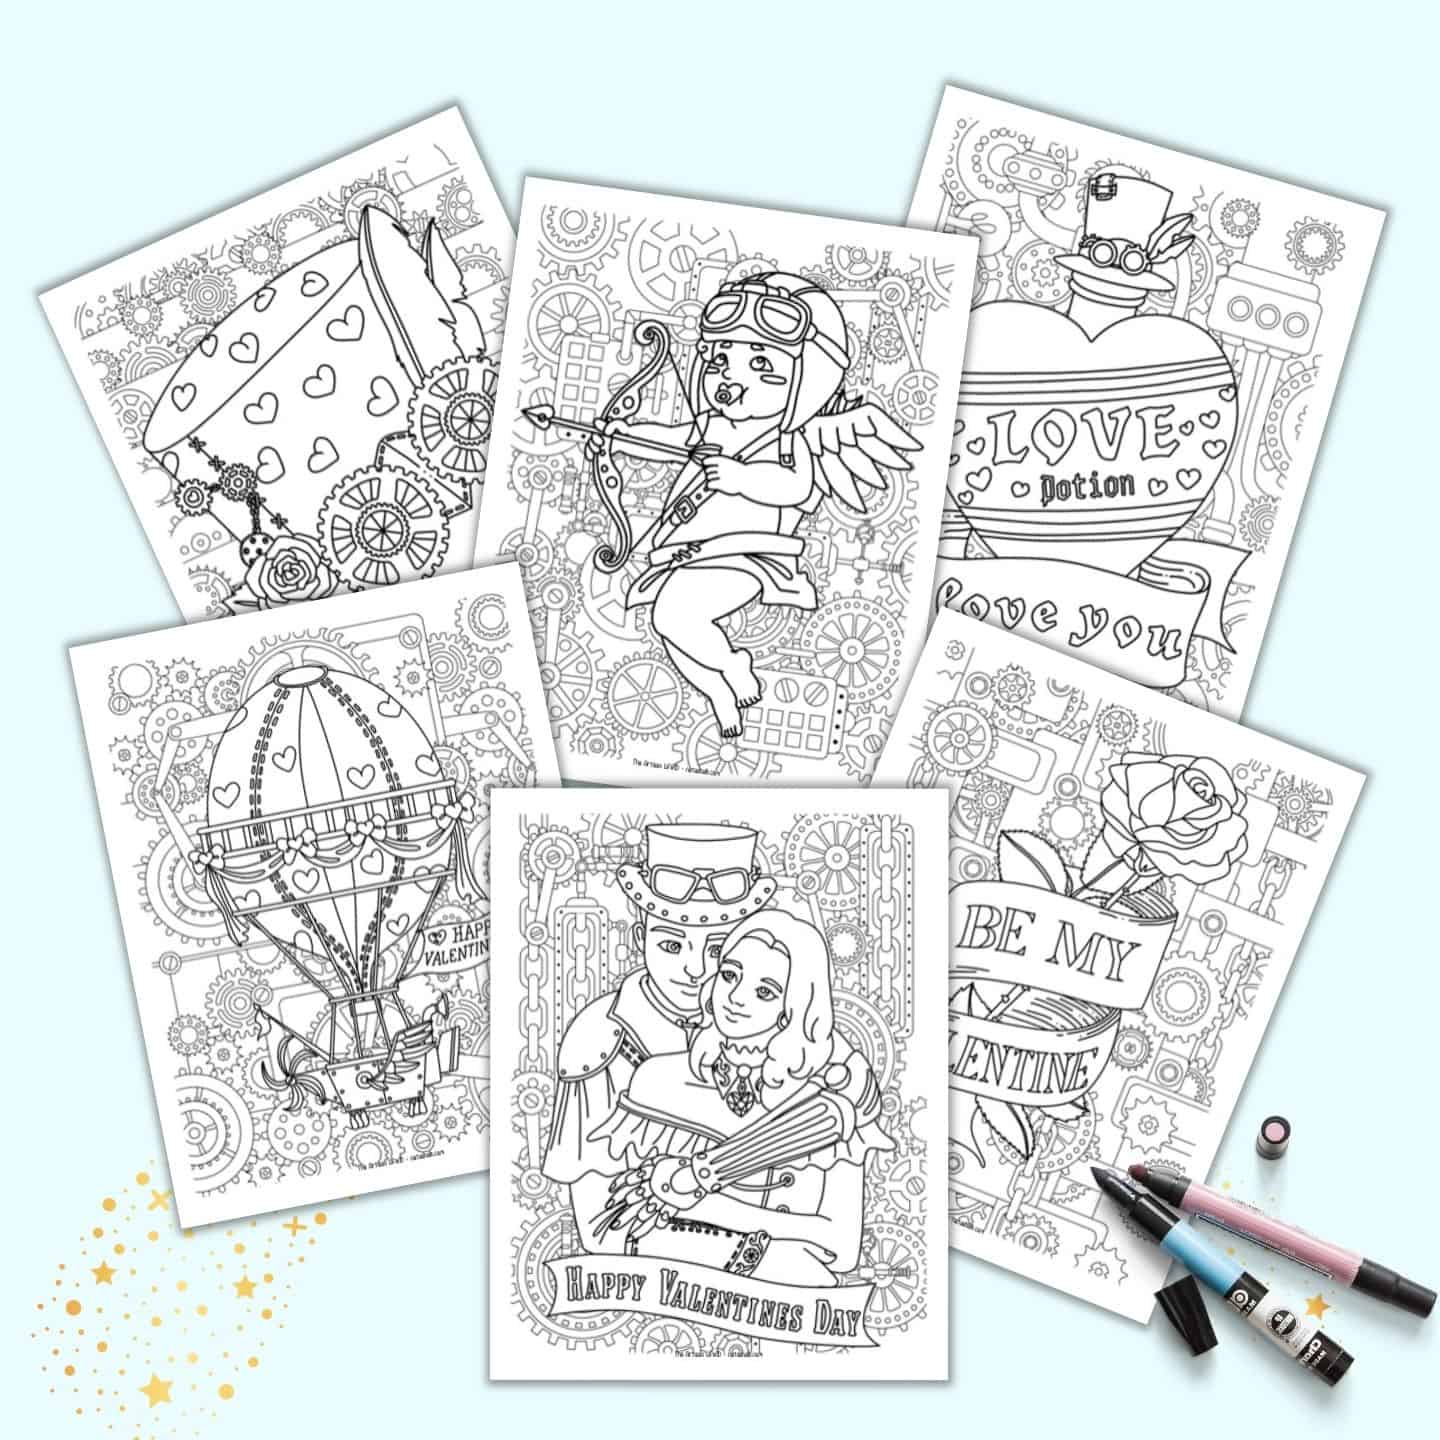 Steampunk Girls Coloring book for Adults and Teensn, Coloring Pages to  relax